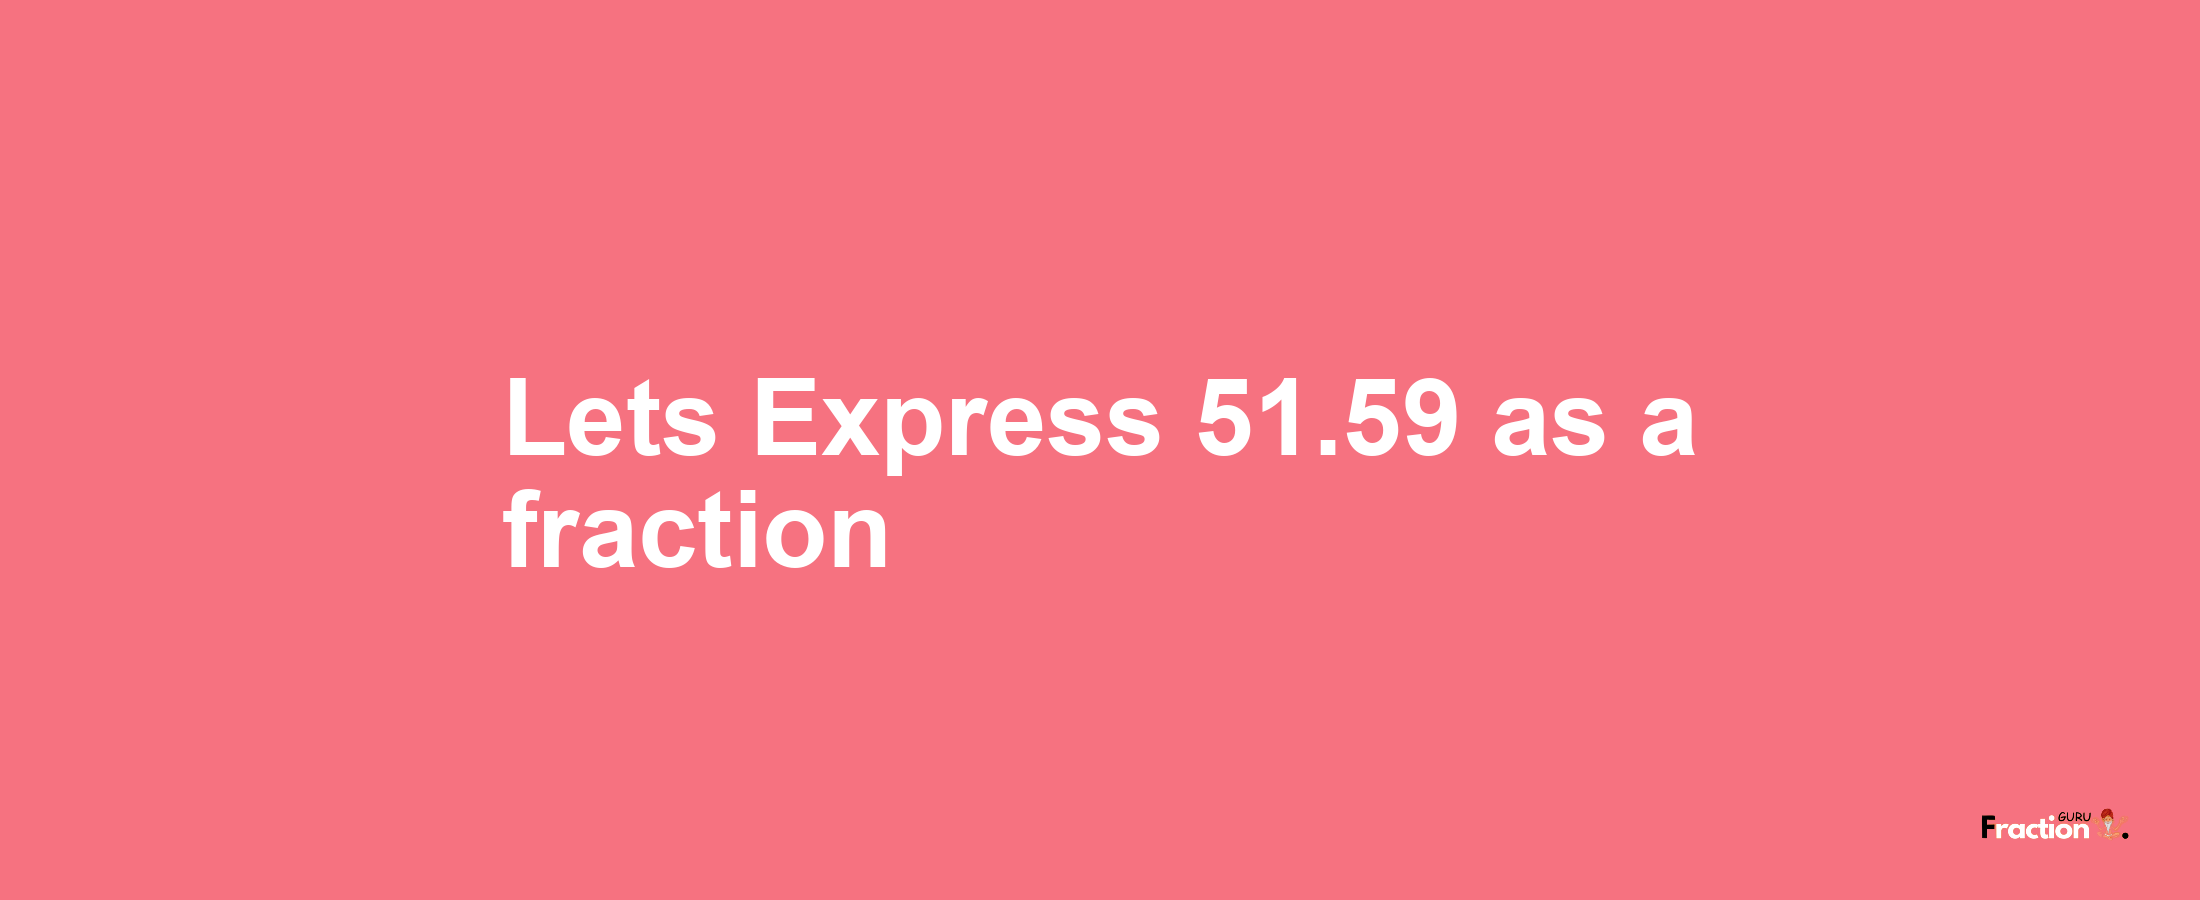 Lets Express 51.59 as afraction